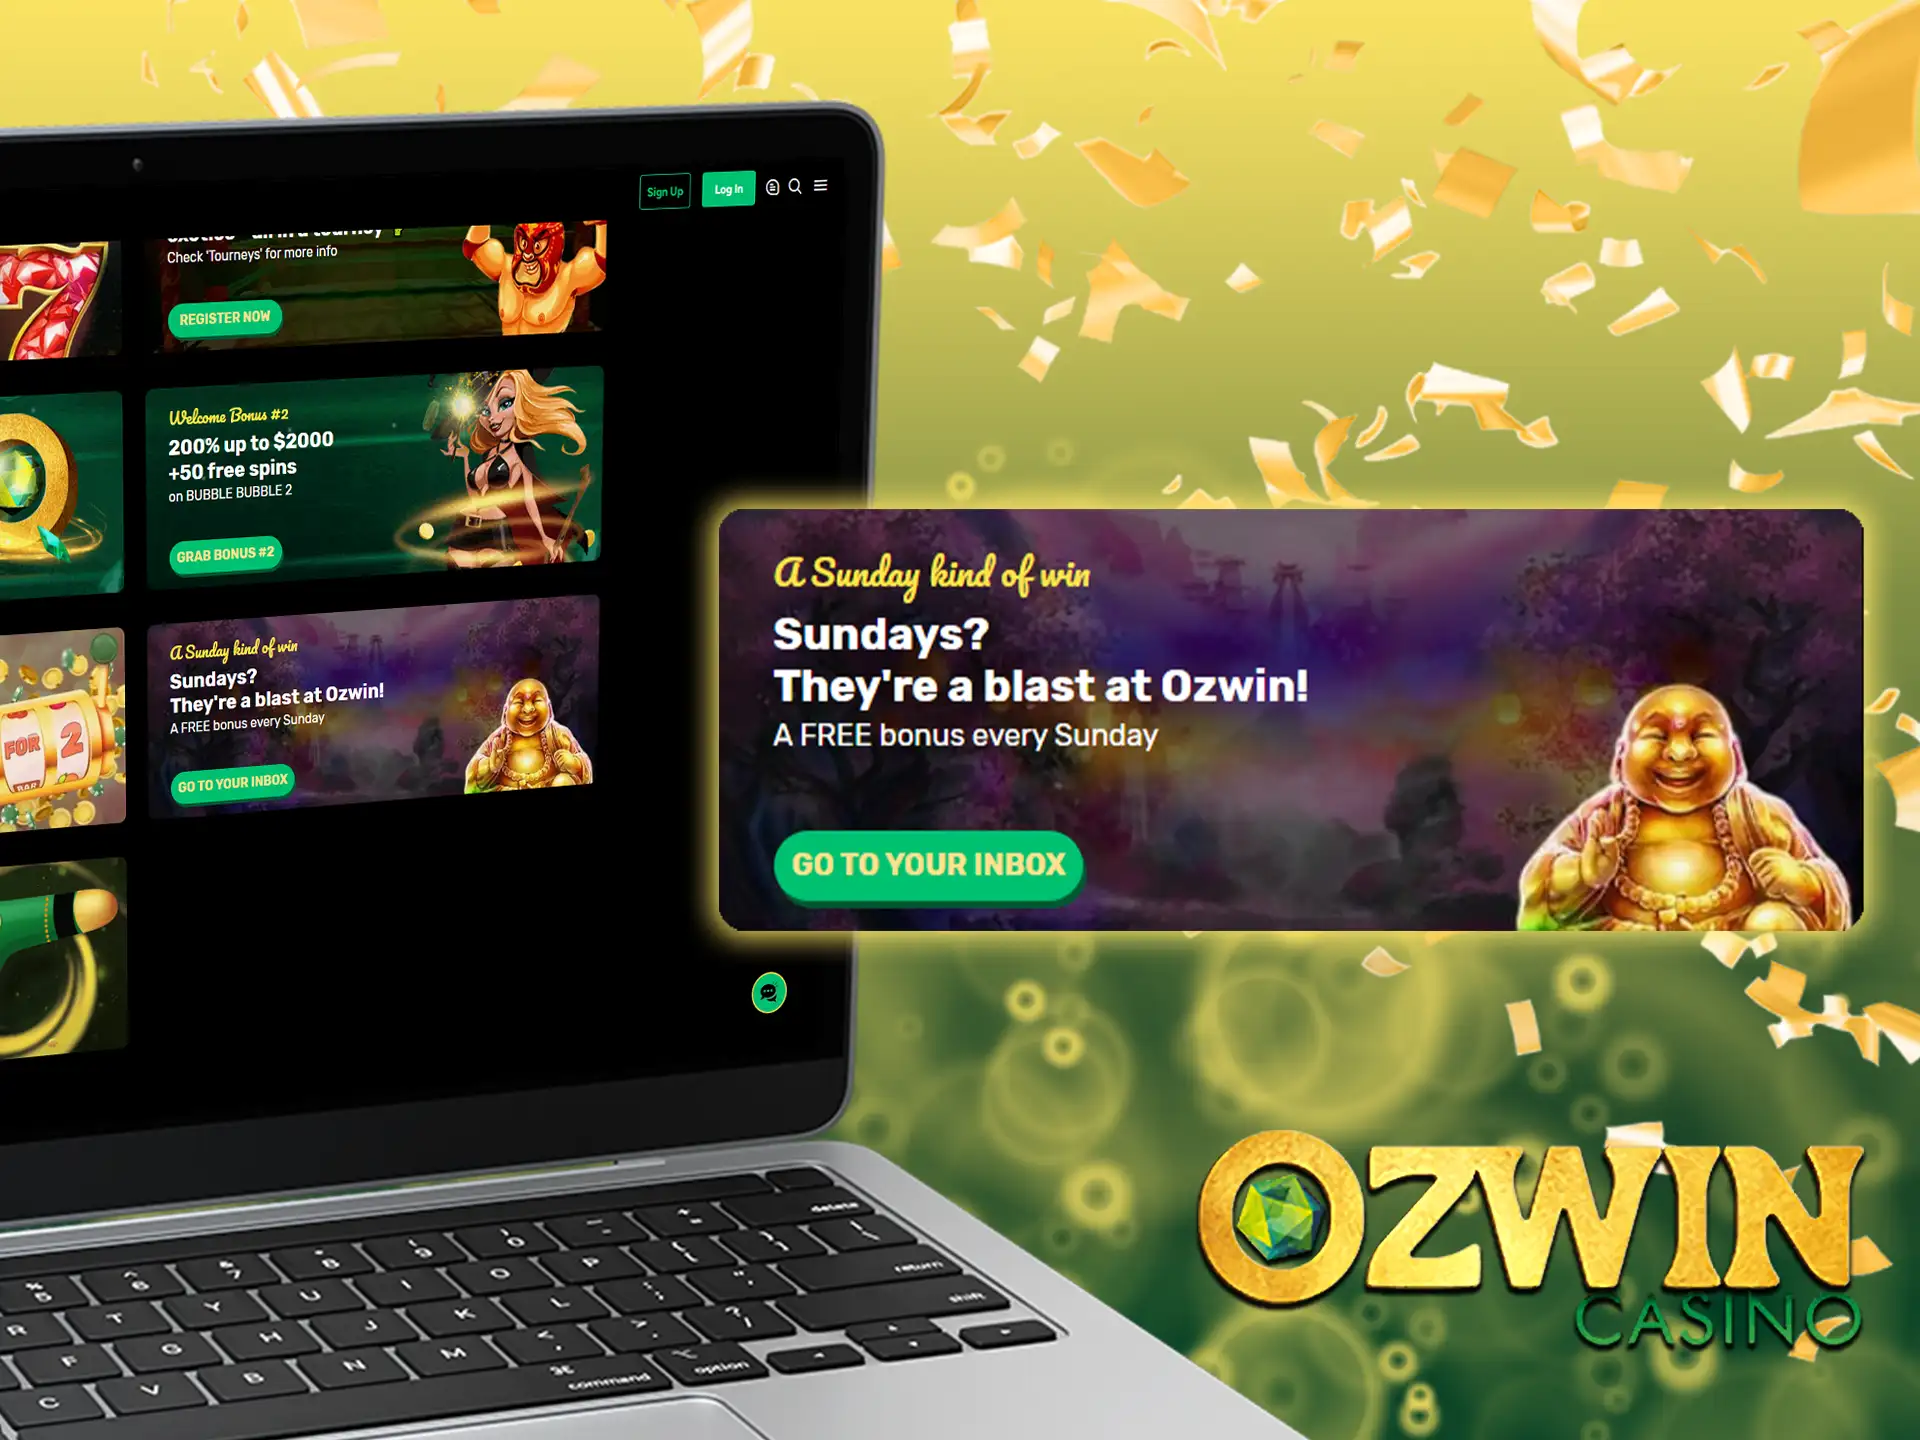 Ozwin makes Sundays special by offering its customers special bonuses!